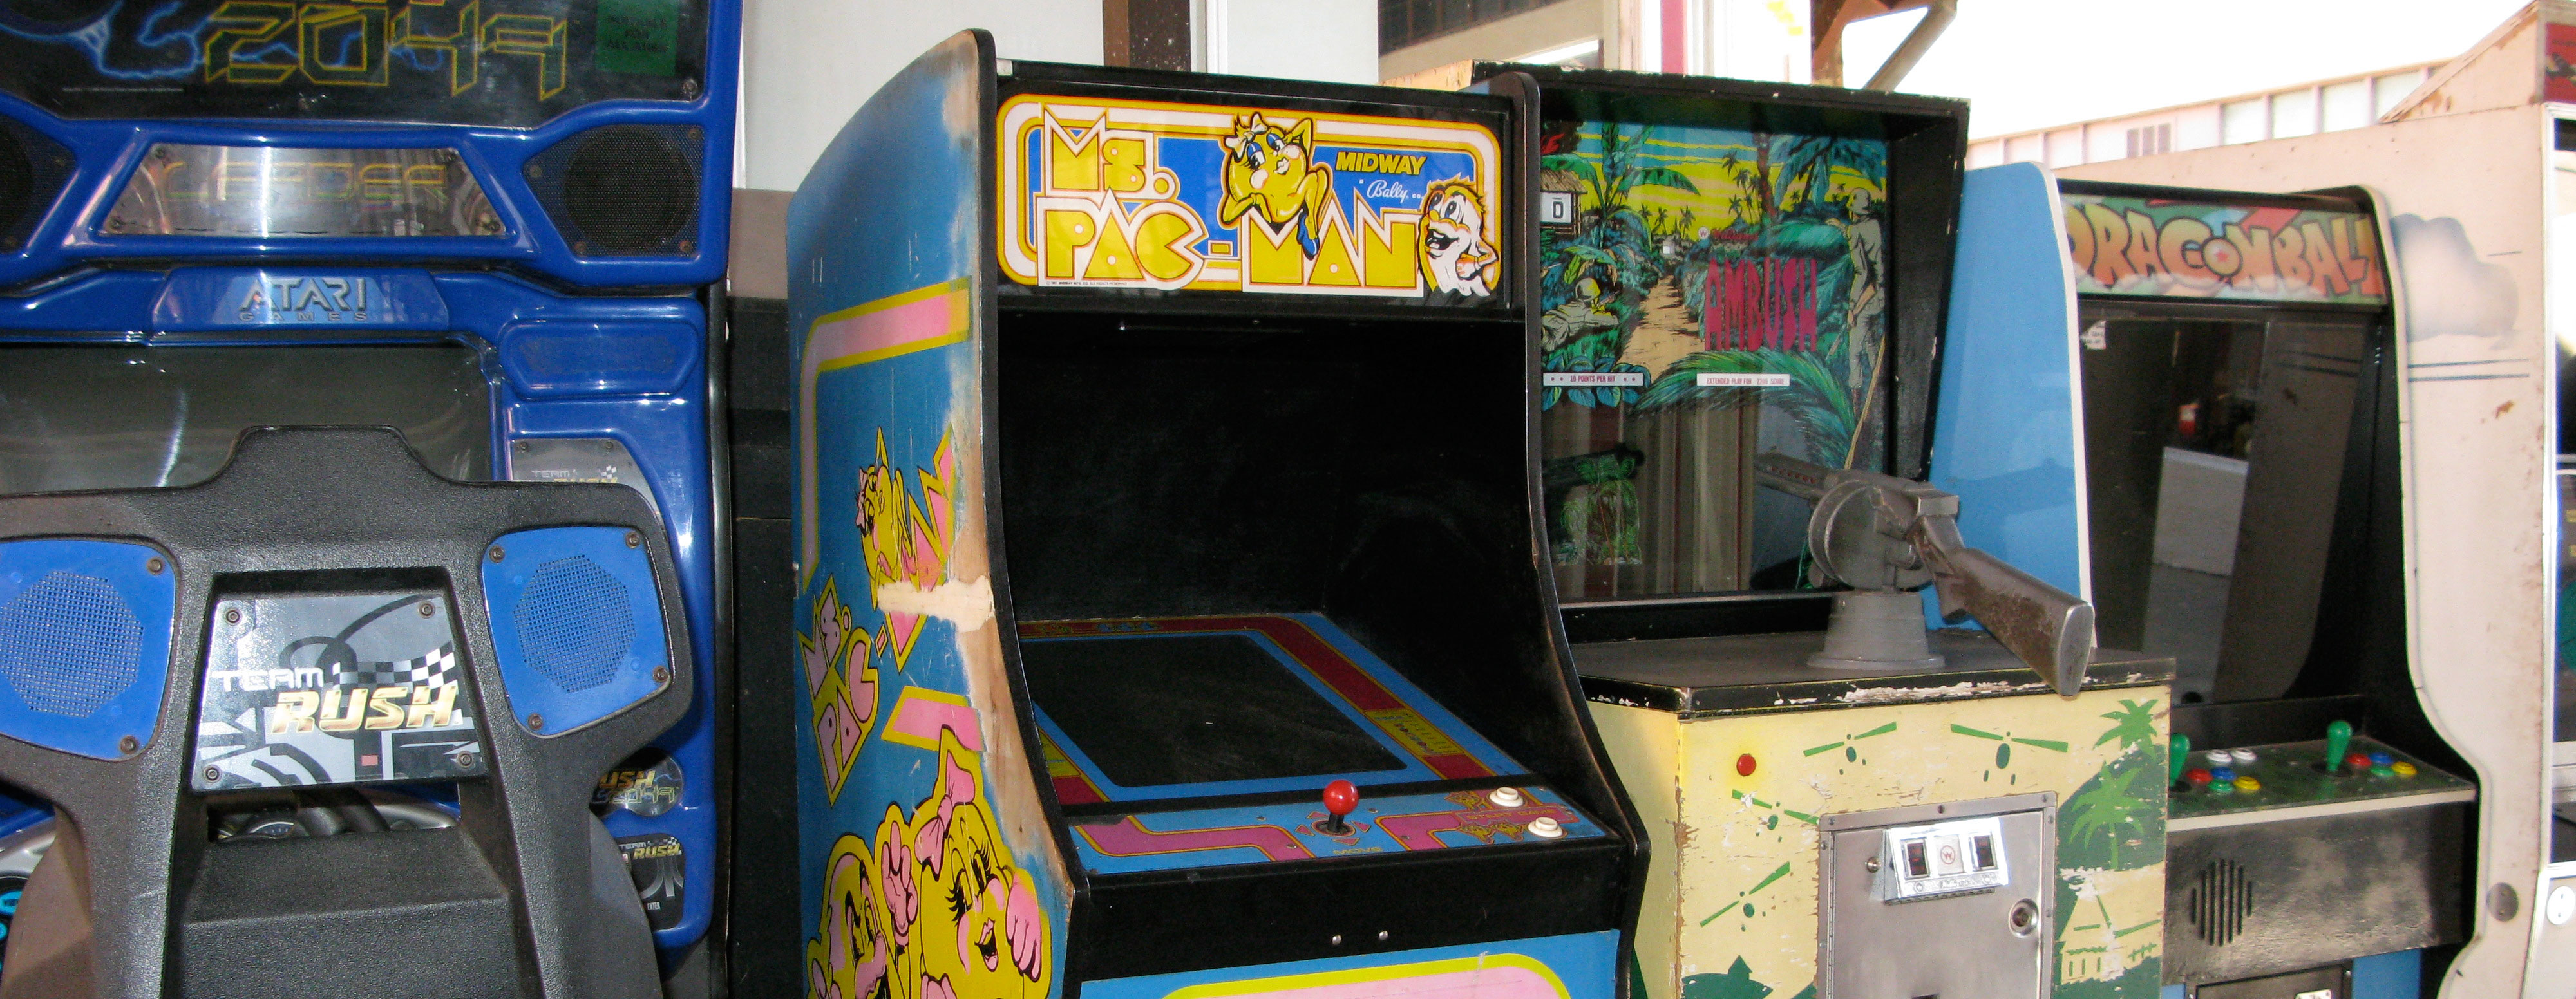 Old school game consoles like Ms. Pac-Man